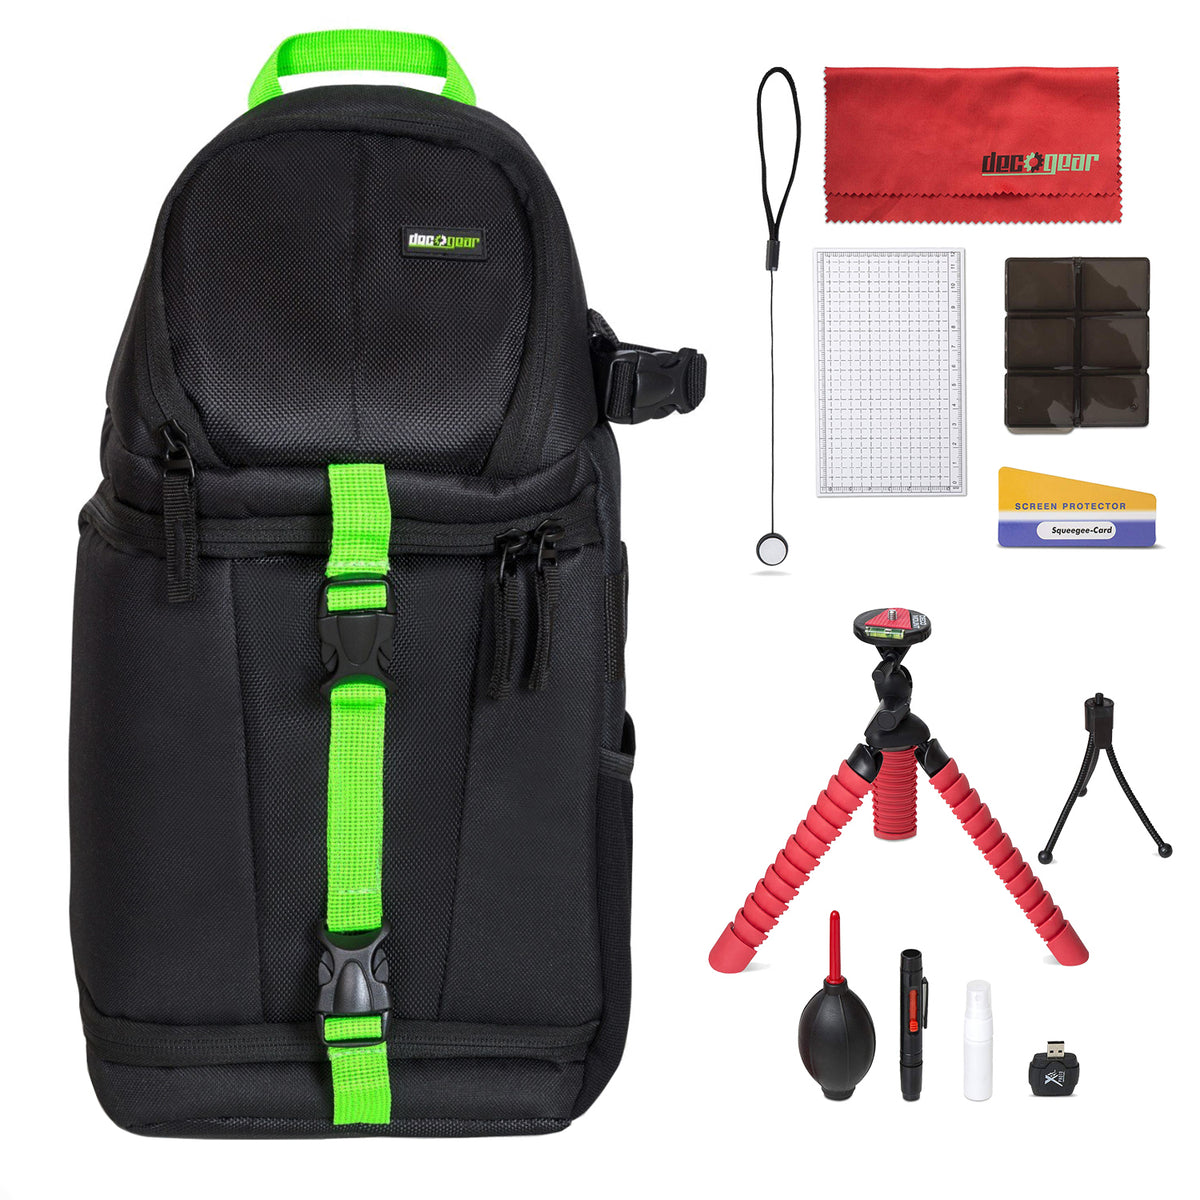 Deco Gear Sling Backpack Accessories Kit for DSLR and Mirrorless Cameras - Deco Gear